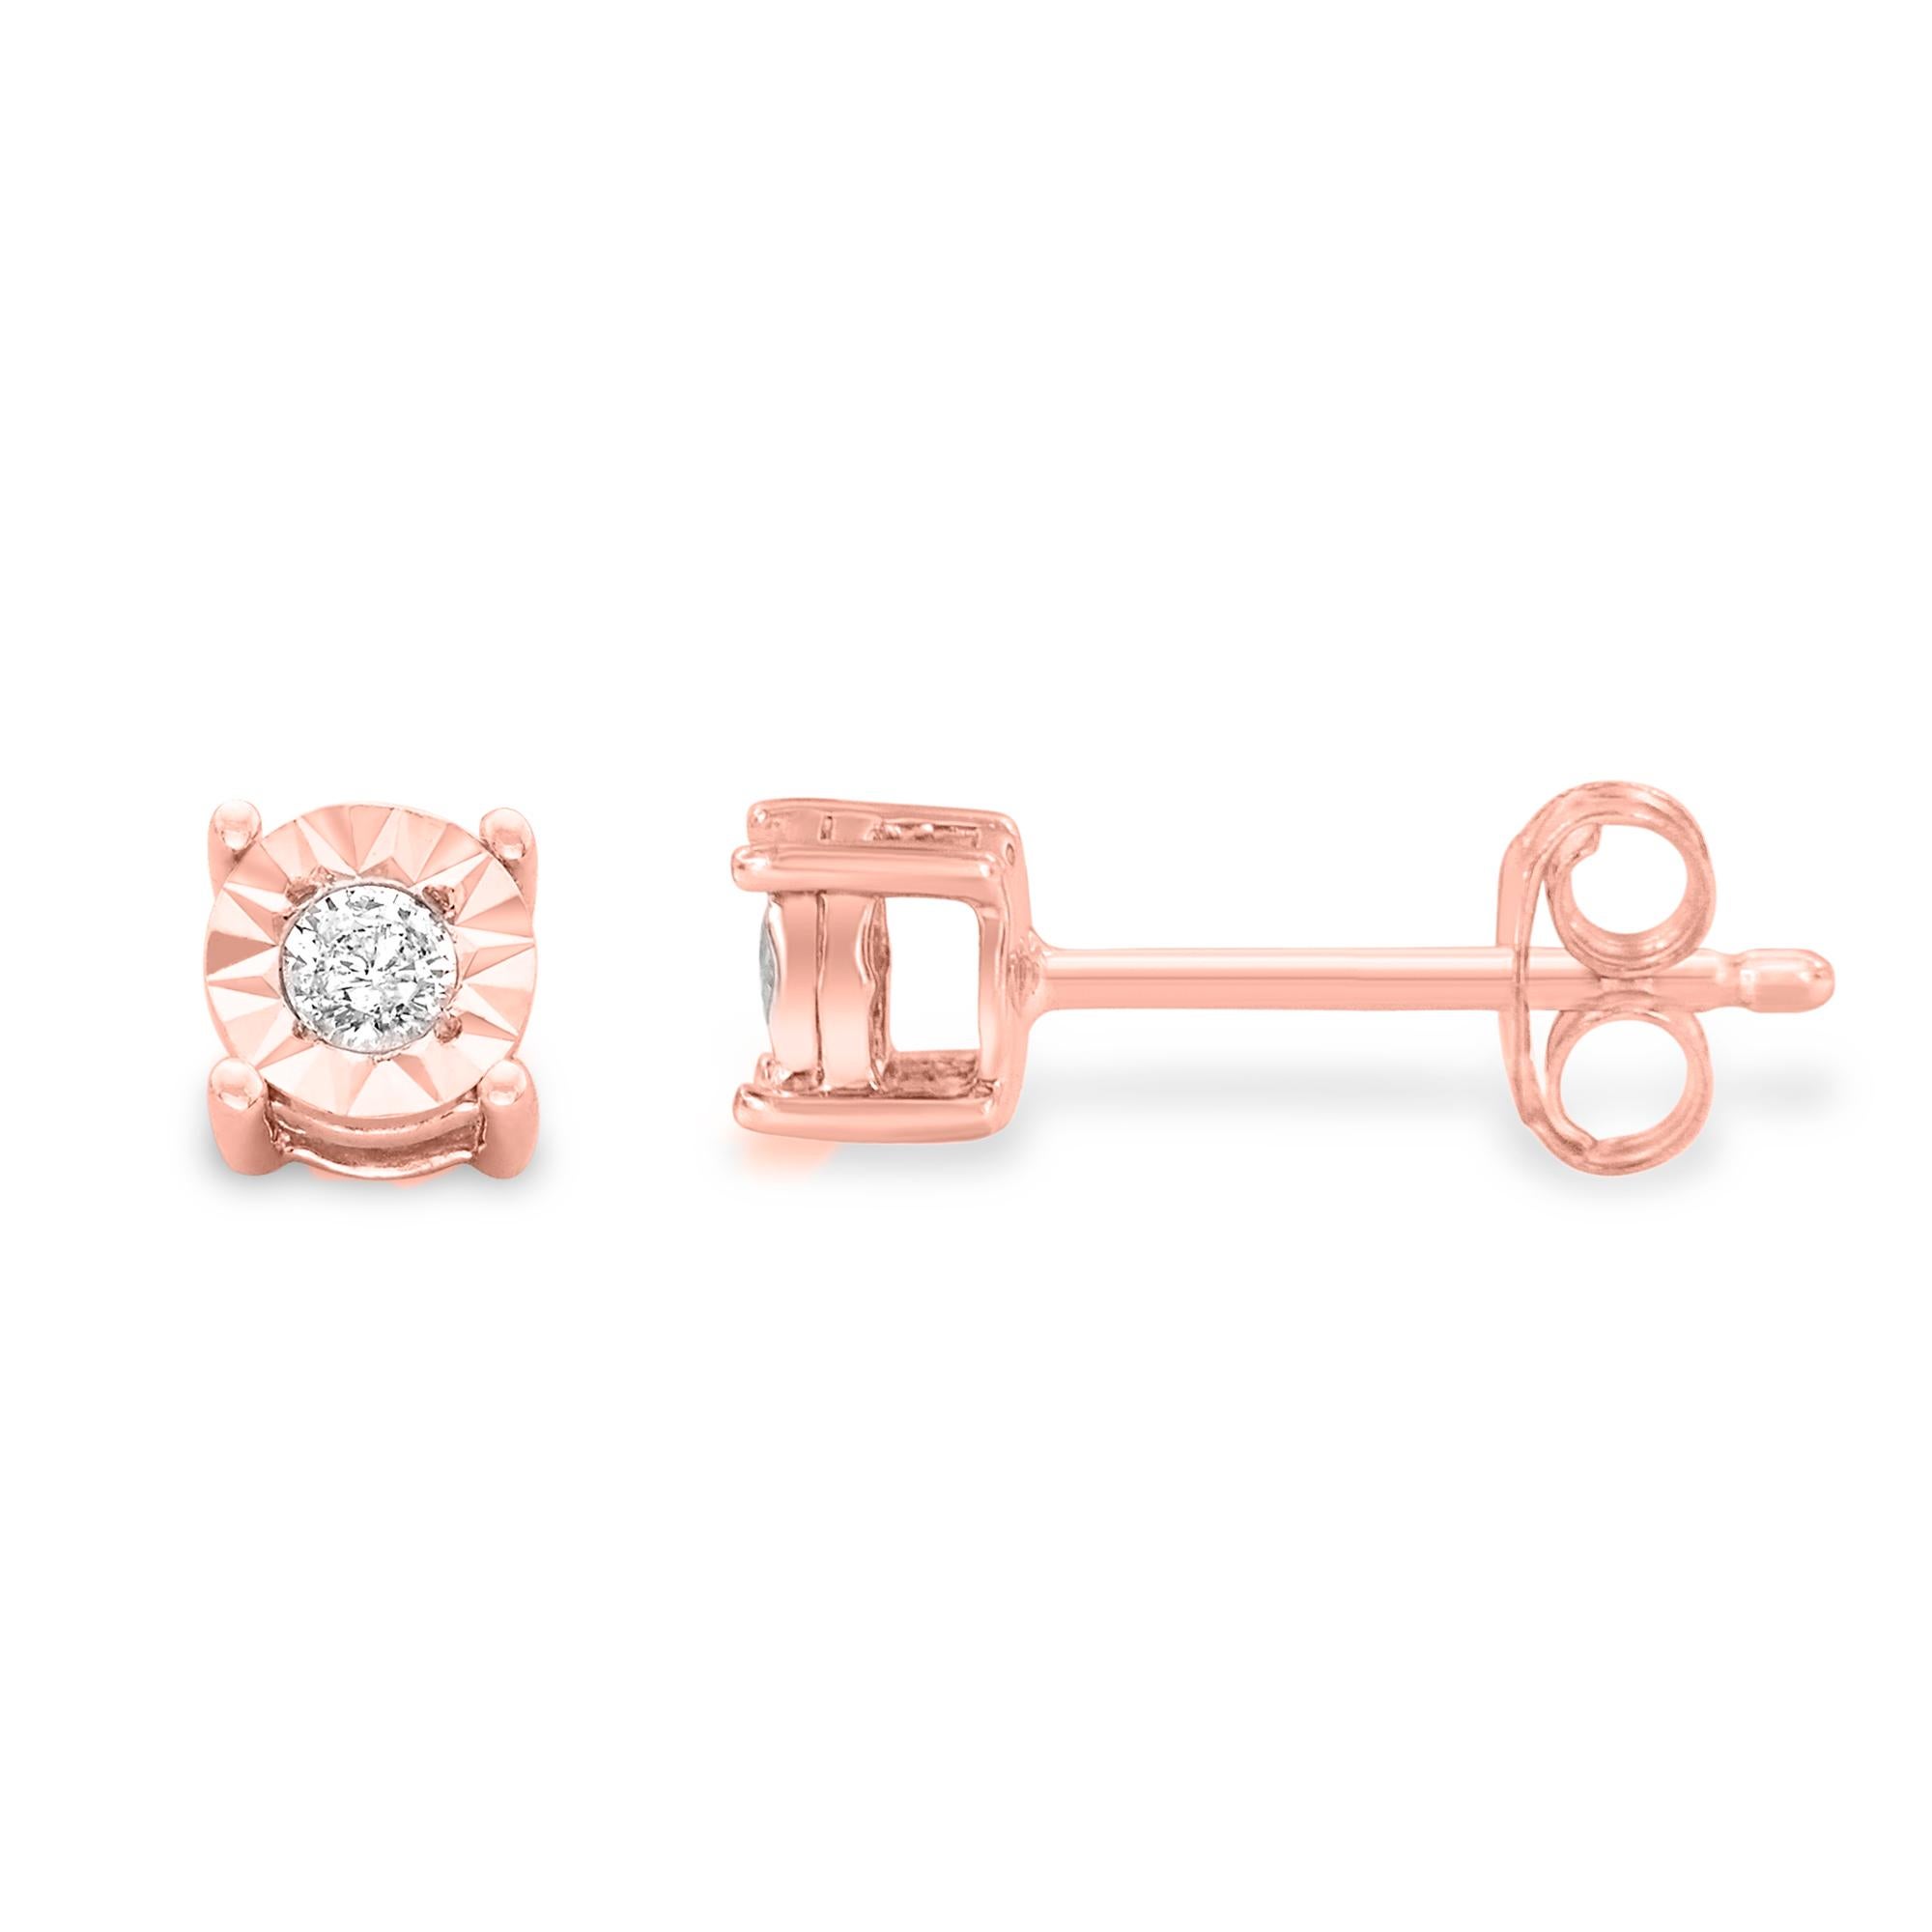 Add a shimmering touch to your wardrobe with these elegant and extravagant diamond earrings. Fashioned in the round shape, the earrings are crafted of sterling silver and have a rose gold plating of 10 karats. Each of the studs captivates sparkling